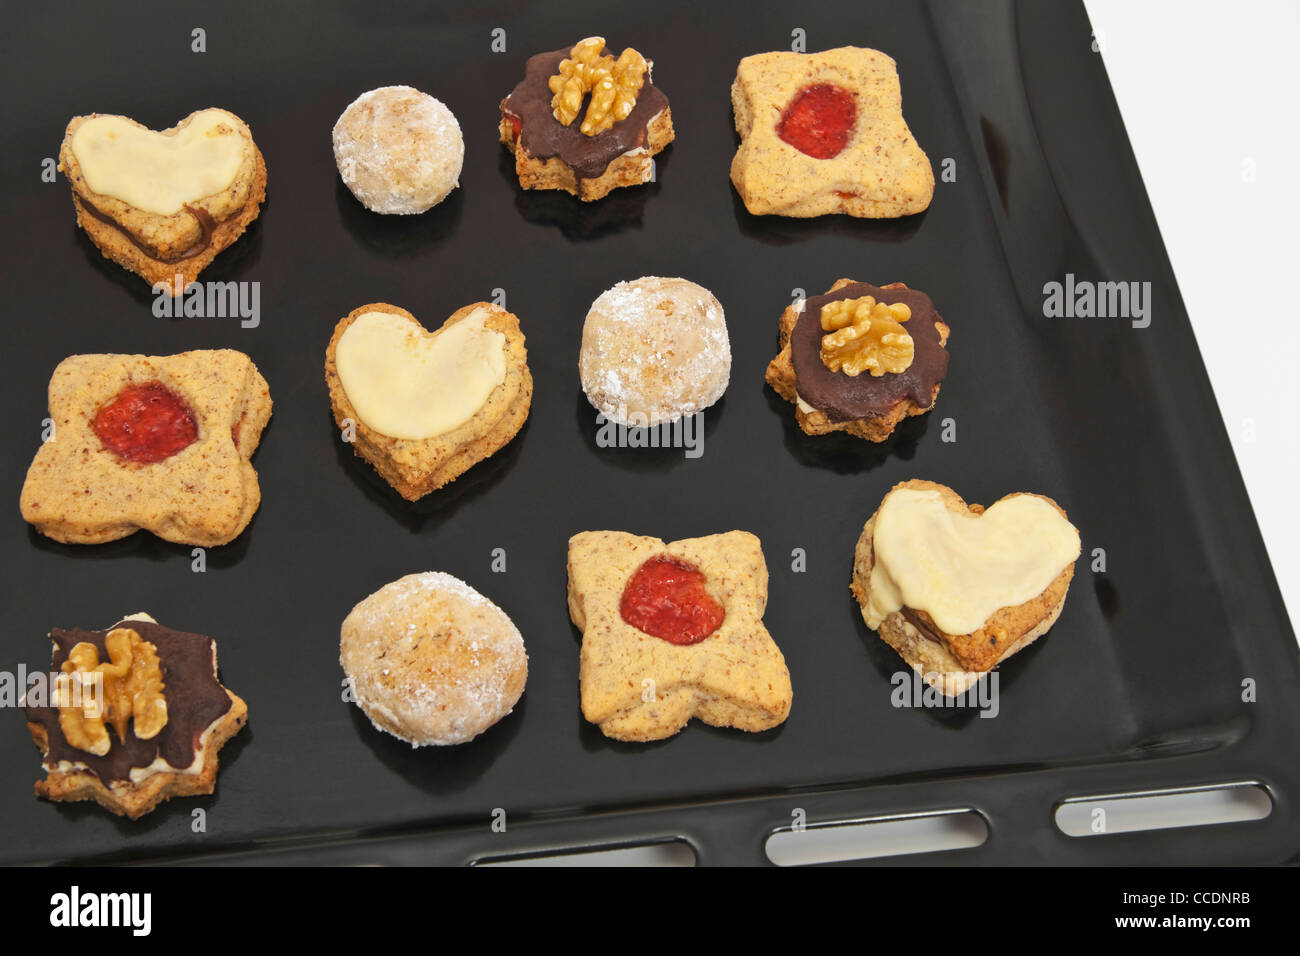 Detail photo of a baking tray with home-made Christmas biscuits Stock Photo